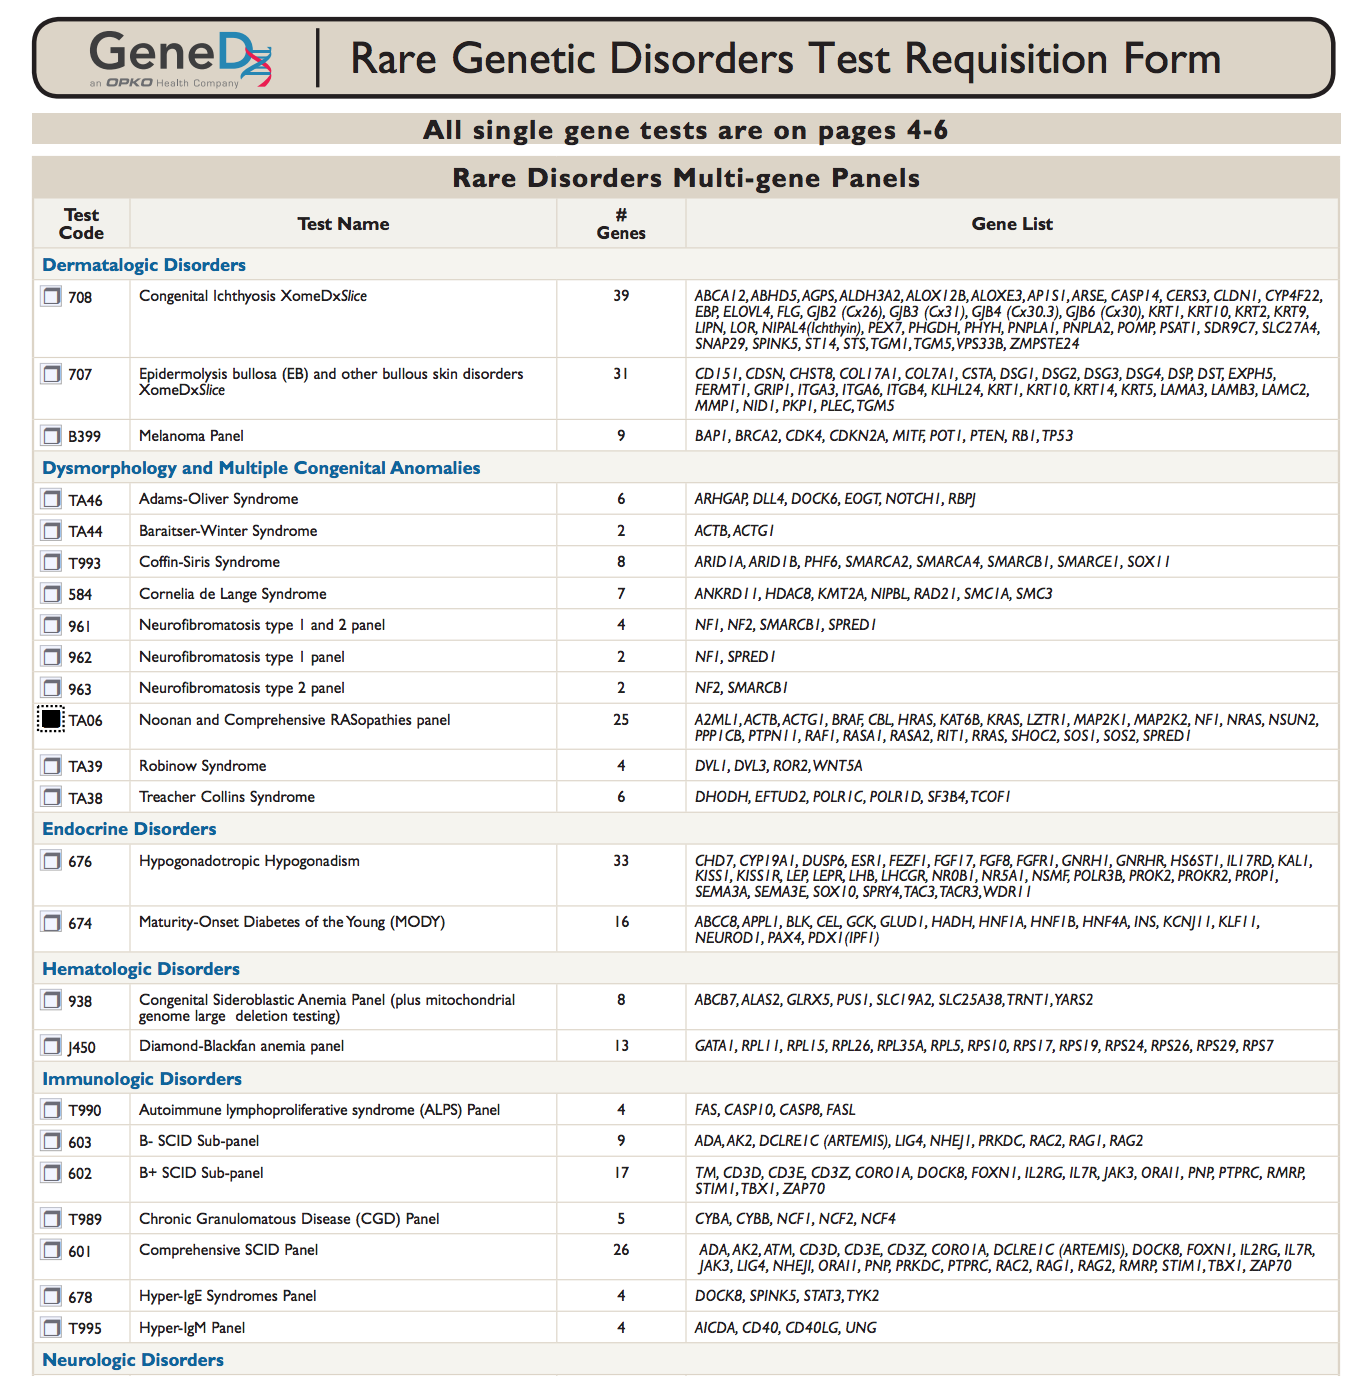 Table with lists with tests, their codes, names, number of genes where the condition tested for is found and the list of those genes